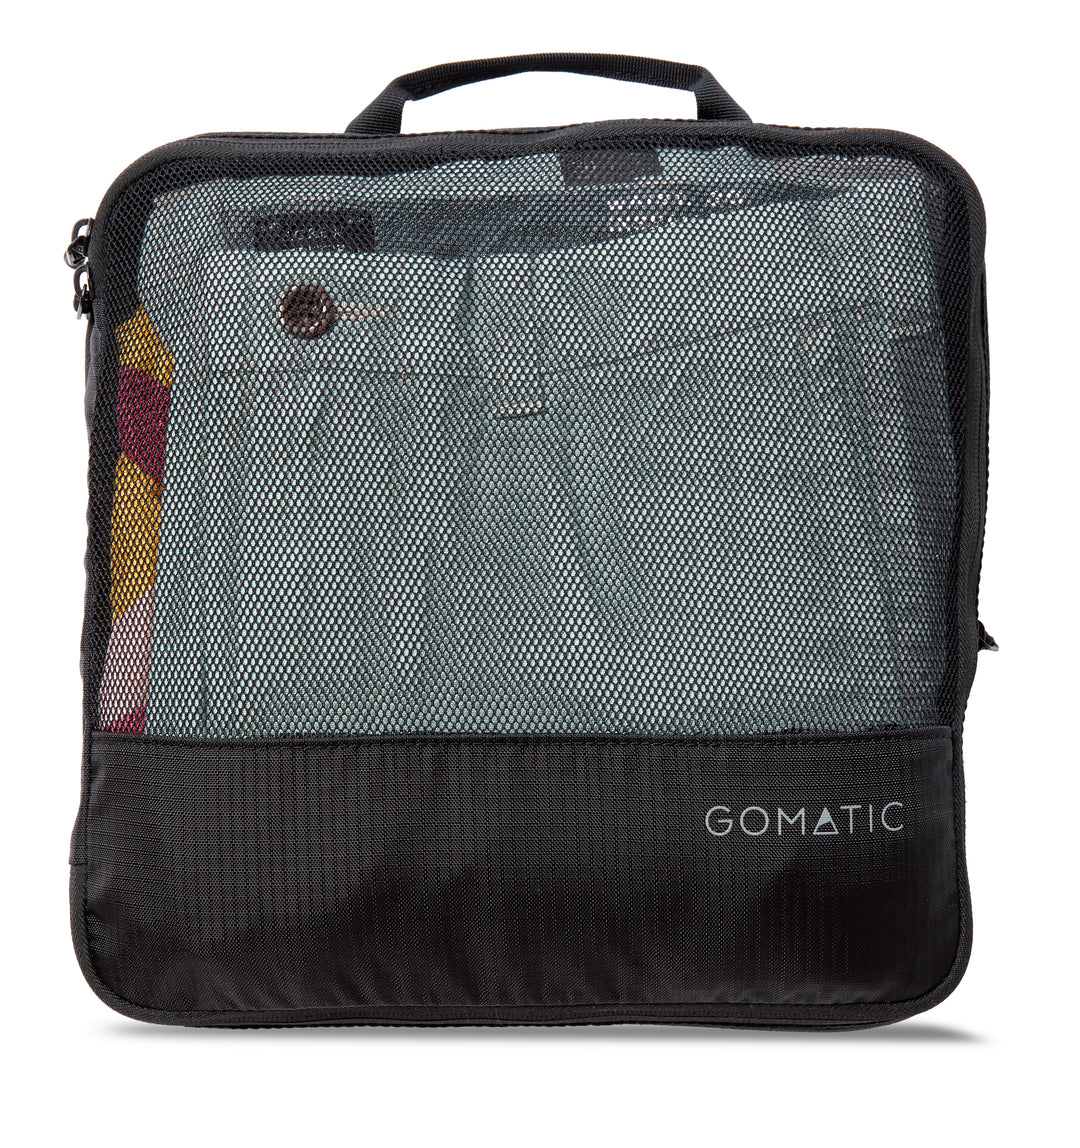 Compression Packing Cubes - GOMATIC Travel Bags and Packs